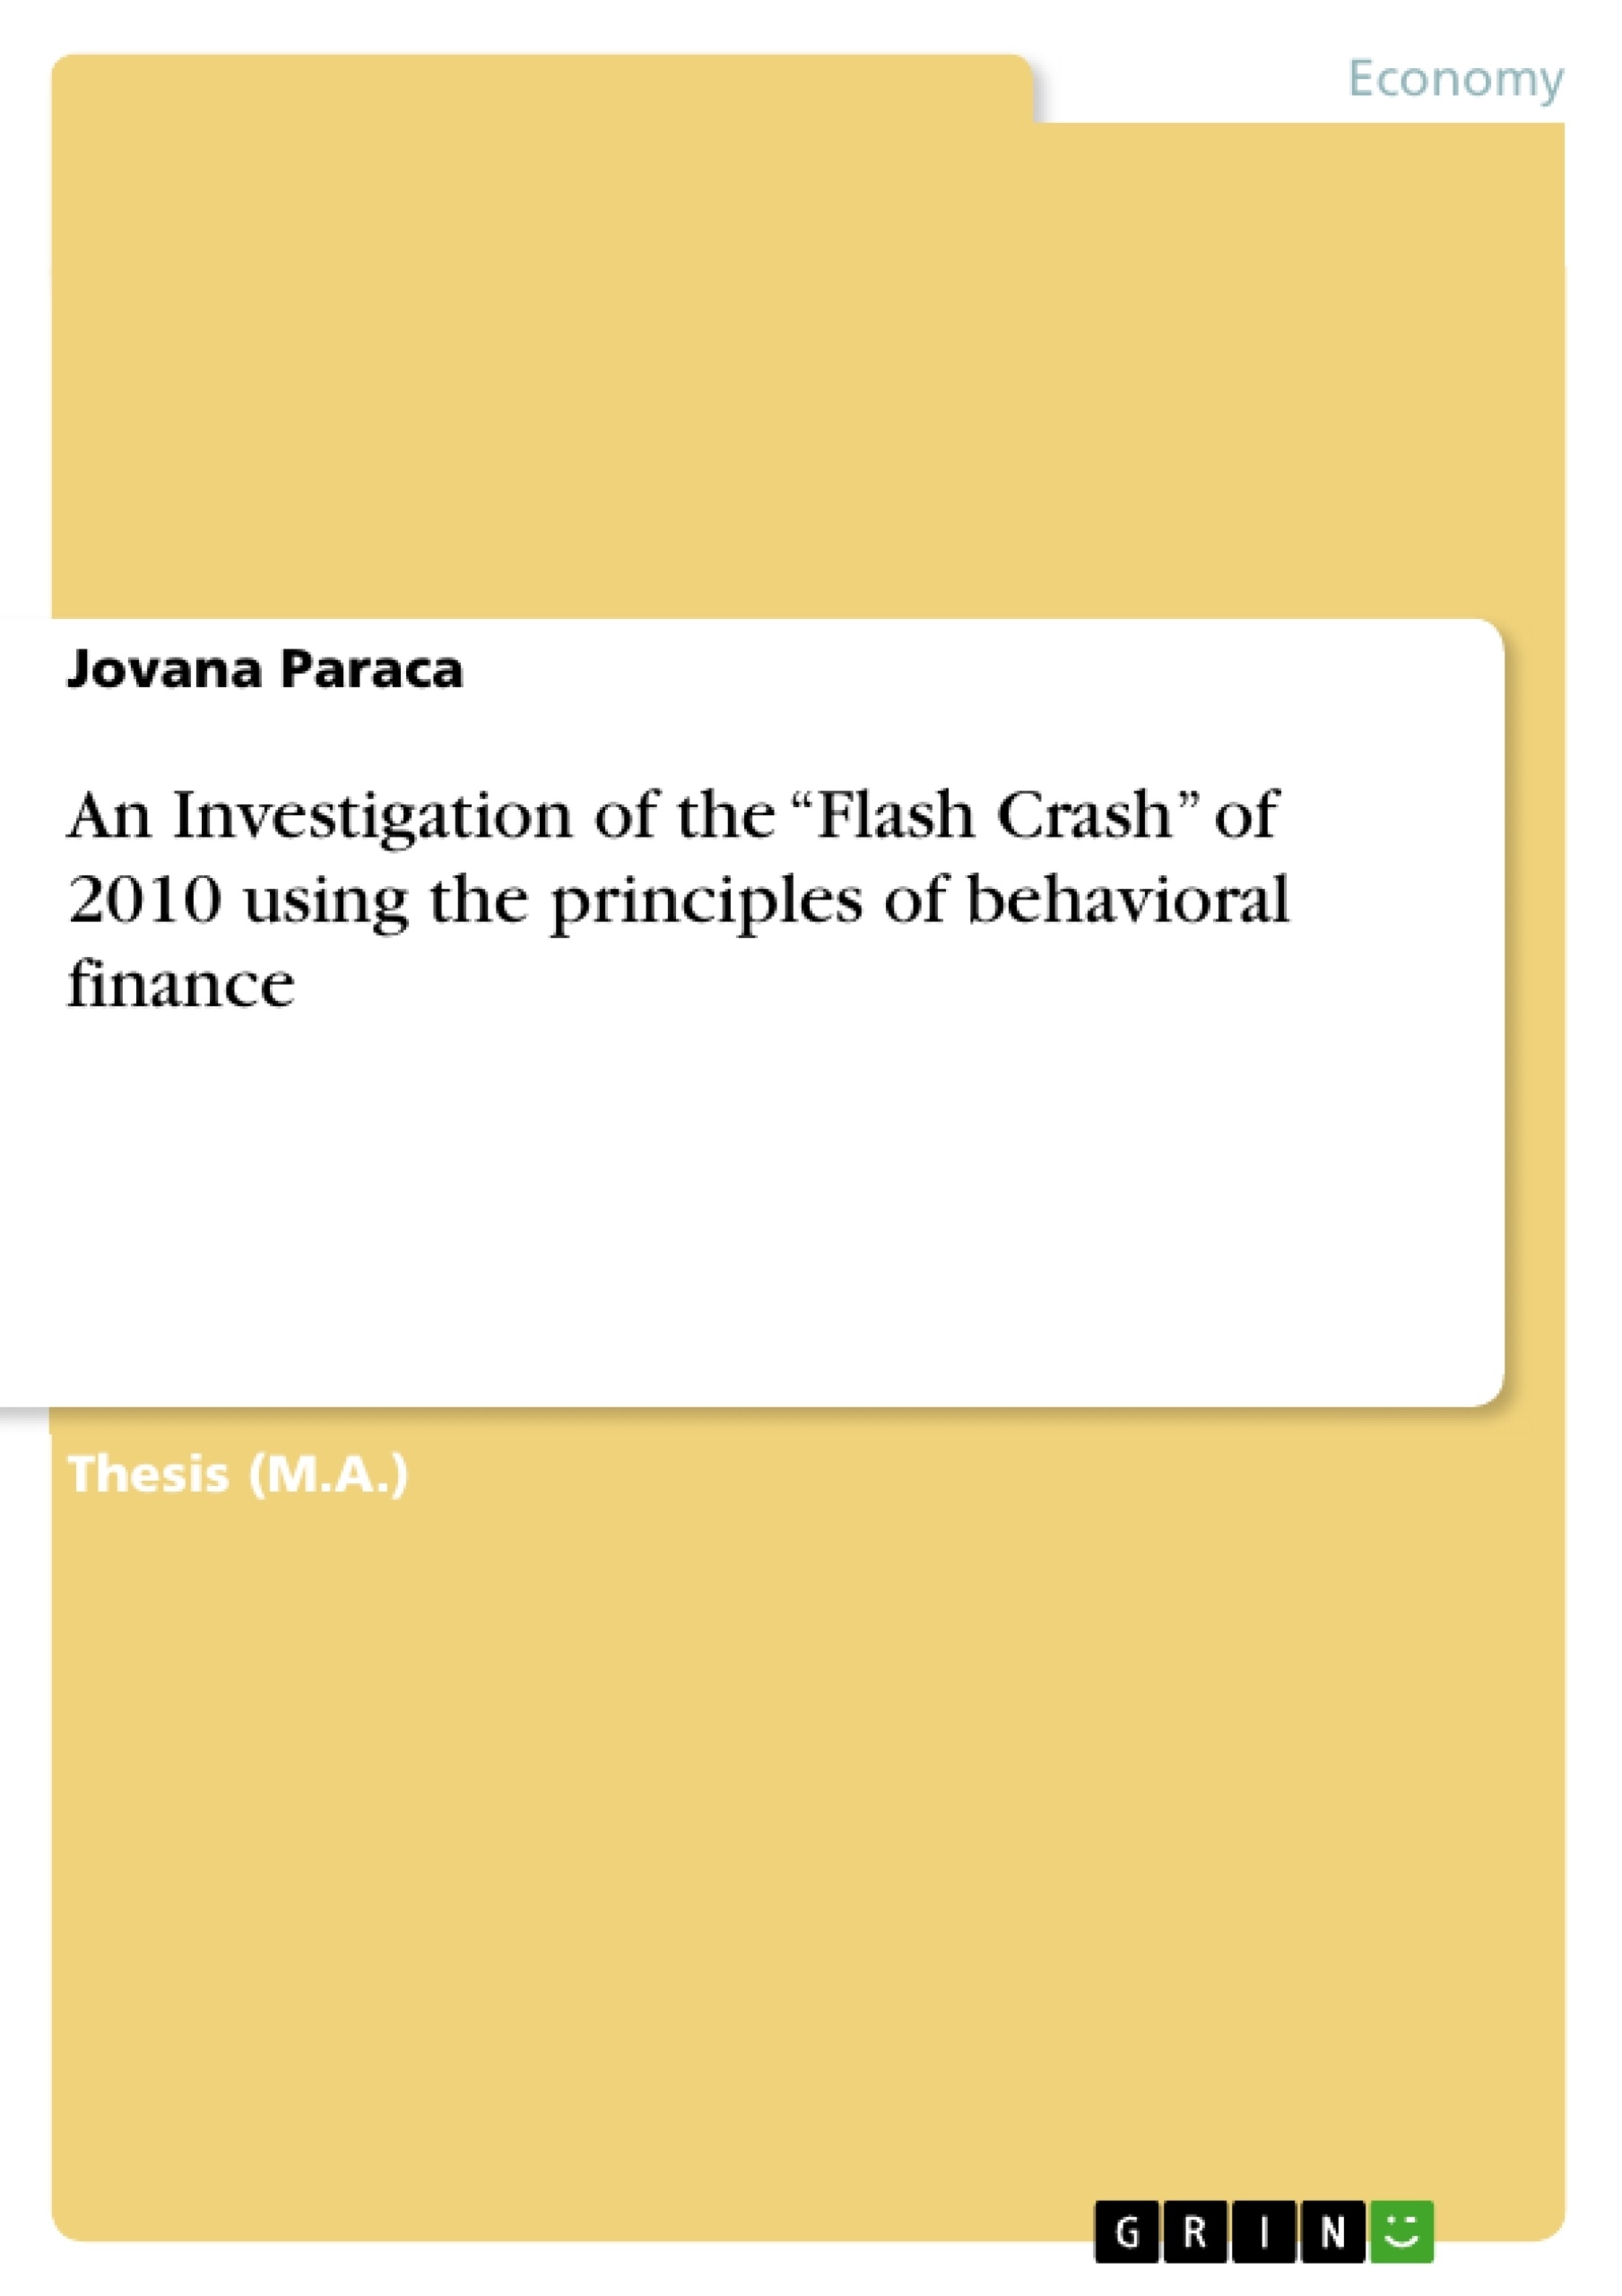 Título: An Investigation of the “Flash Crash” of 2010 using the principles of behavioral finance